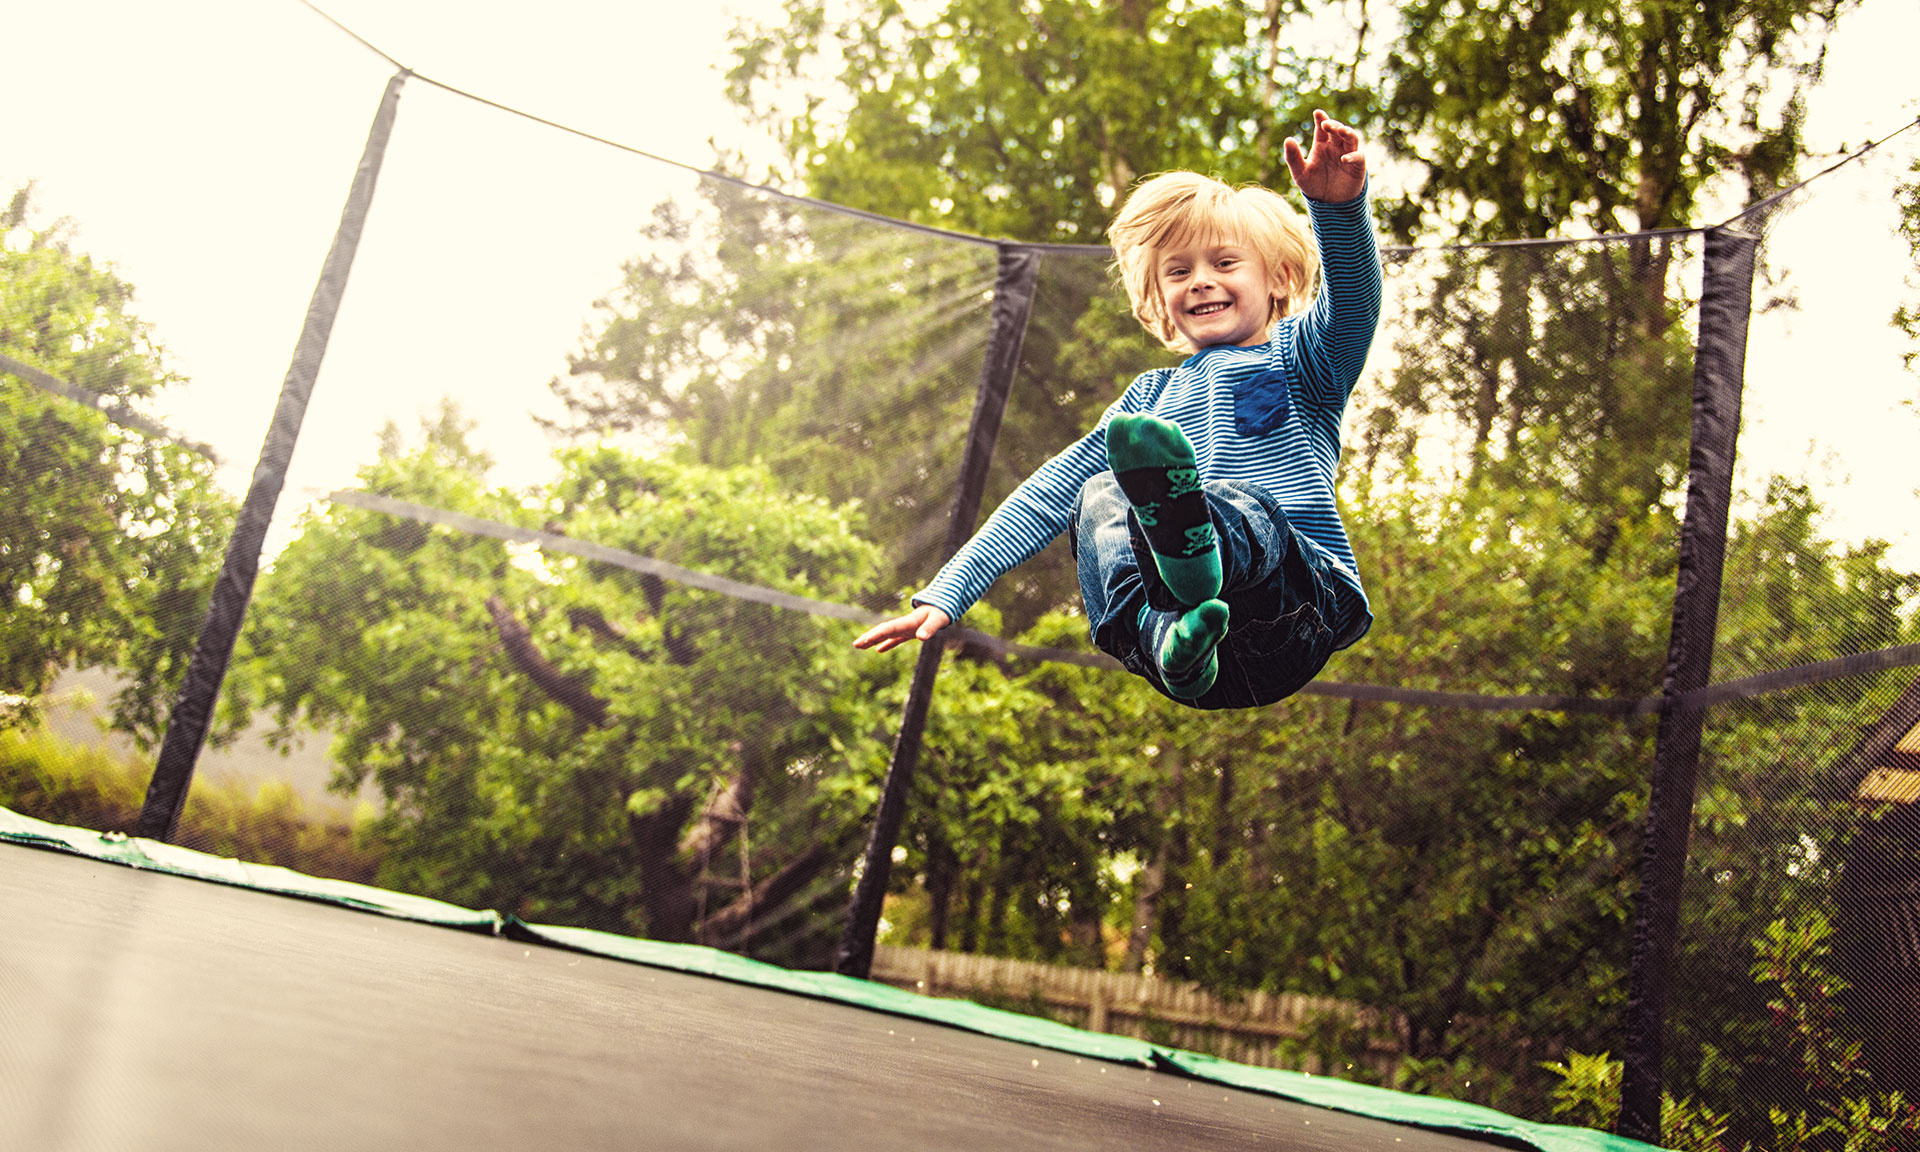 Trampolining: A happy boy jumps on a backyard trampoline, Recreational outdoor activity and sport. 1920x1160 HD Background.